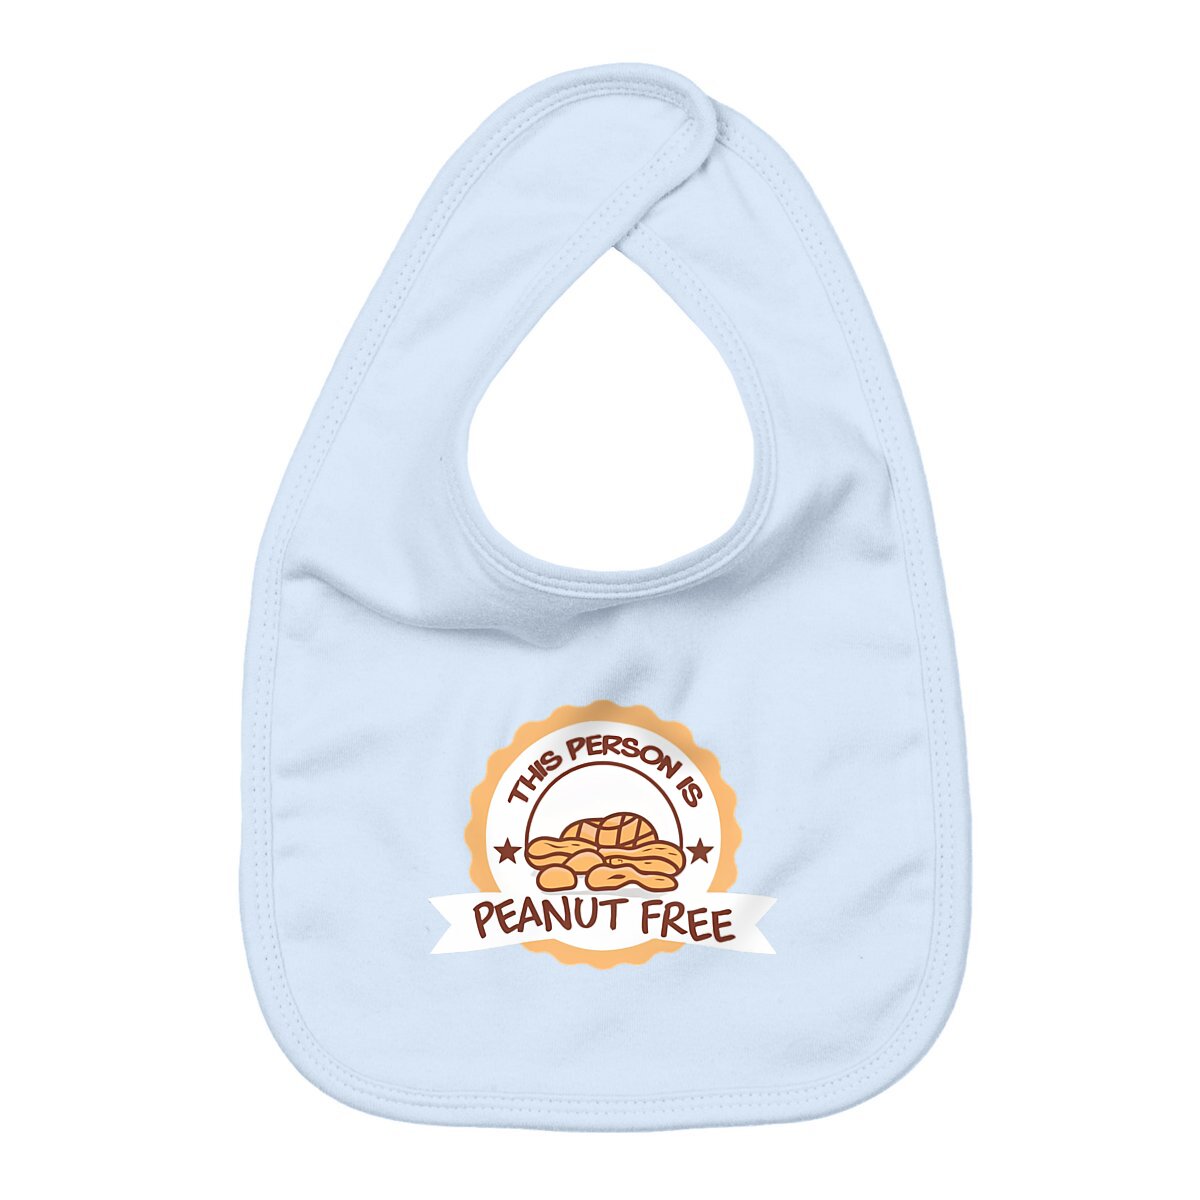 This Person Is Peanut Free Organic Cotton Graphic Baby Bib | Hypoallergenic - Allergy Friendly - Naturally Free